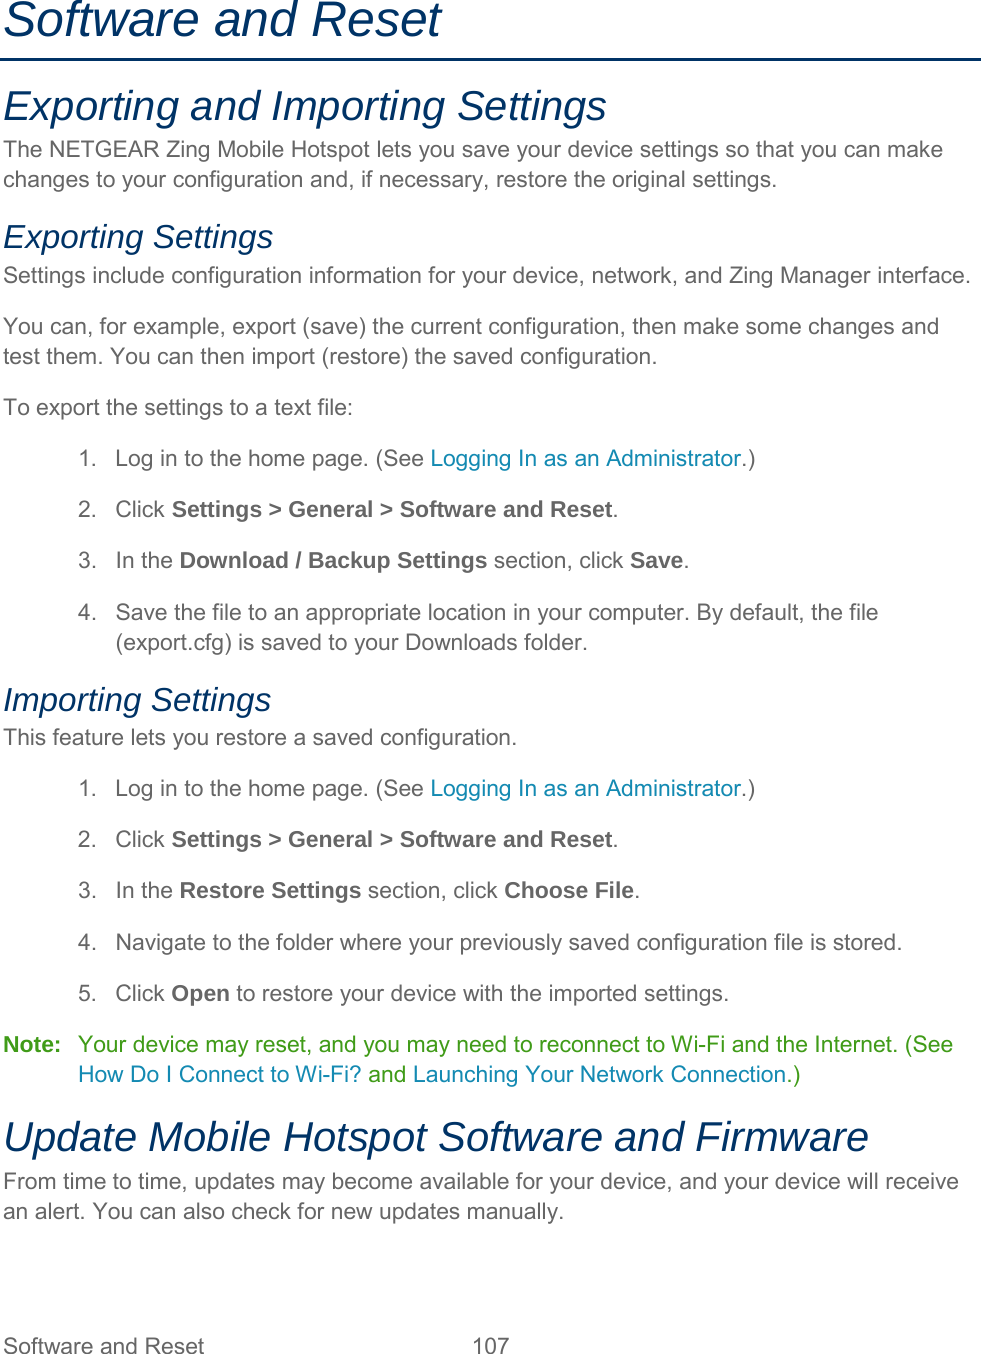 Software and Reset Exporting and Importing Settings The NETGEAR Zing Mobile Hotspot lets you save your device settings so that you can make changes to your configuration and, if necessary, restore the original settings. Exporting Settings Settings include configuration information for your device, network, and Zing Manager interface. You can, for example, export (save) the current configuration, then make some changes and test them. You can then import (restore) the saved configuration. To export the settings to a text file: 1. Log in to the home page. (See Logging In as an Administrator.) 2. Click Settings &gt; General &gt; Software and Reset. 3. In the Download / Backup Settings section, click Save. 4. Save the file to an appropriate location in your computer. By default, the file (export.cfg) is saved to your Downloads folder. Importing Settings This feature lets you restore a saved configuration. 1. Log in to the home page. (See Logging In as an Administrator.) 2. Click Settings &gt; General &gt; Software and Reset. 3. In the Restore Settings section, click Choose File. 4. Navigate to the folder where your previously saved configuration file is stored. 5. Click Open to restore your device with the imported settings. Note:   Your device may reset, and you may need to reconnect to Wi-Fi and the Internet. (See How Do I Connect to Wi-Fi? and Launching Your Network Connection.) Update Mobile Hotspot Software and Firmware From time to time, updates may become available for your device, and your device will receive an alert. You can also check for new updates manually. Software and Reset 107   